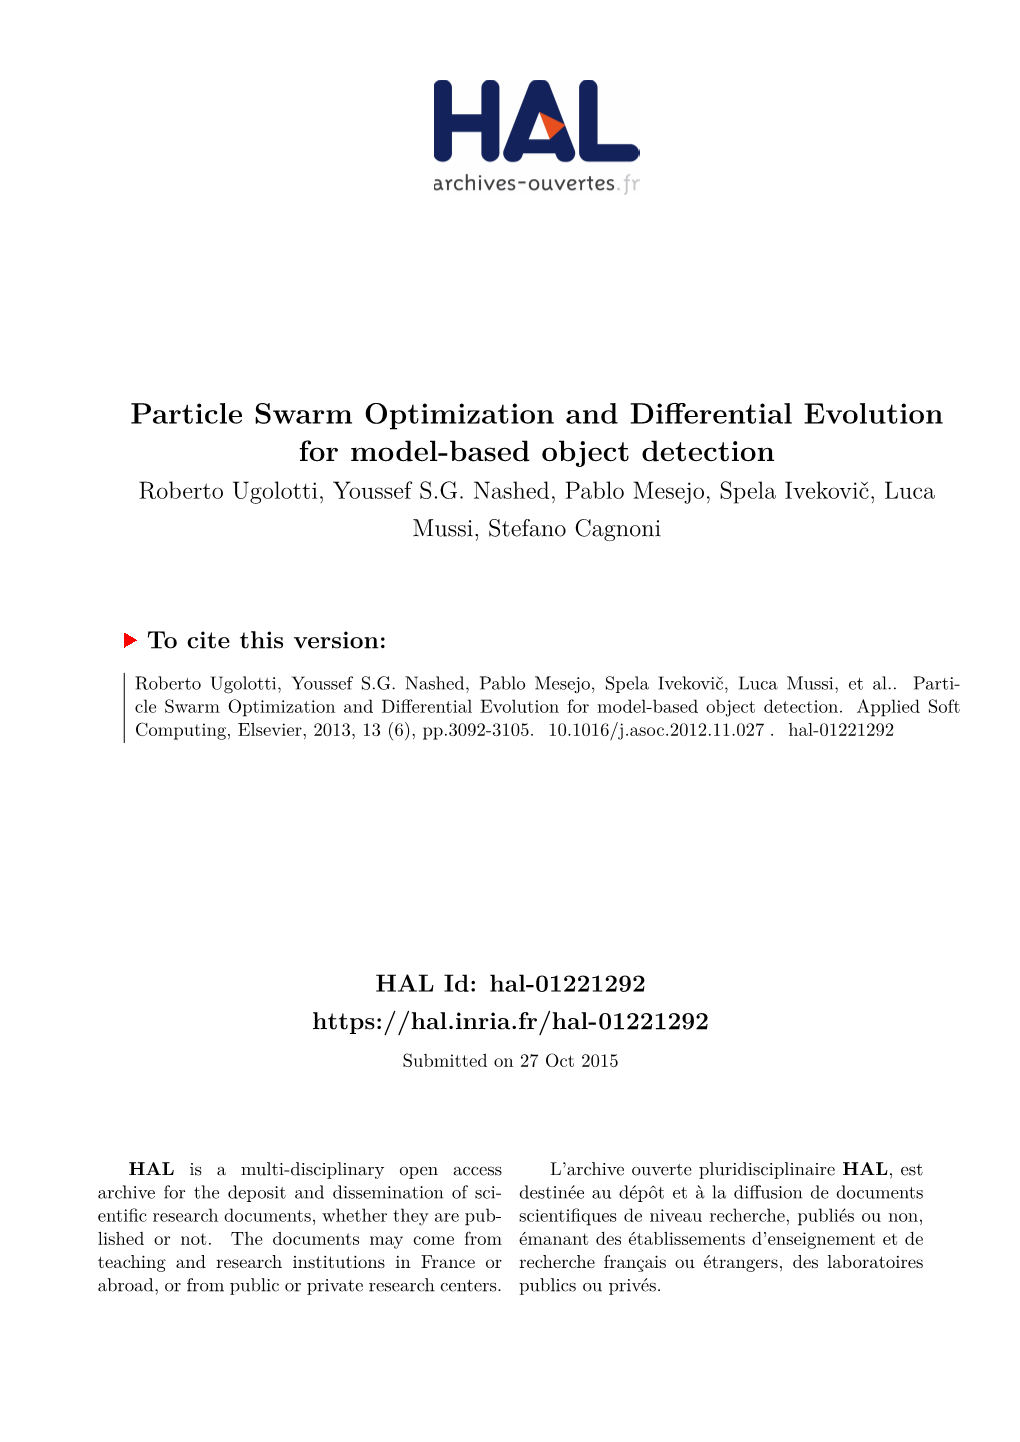 Particle Swarm Optimization and Differential Evolution for Model-Based Object Detection Roberto Ugolotti, Youssef S.G